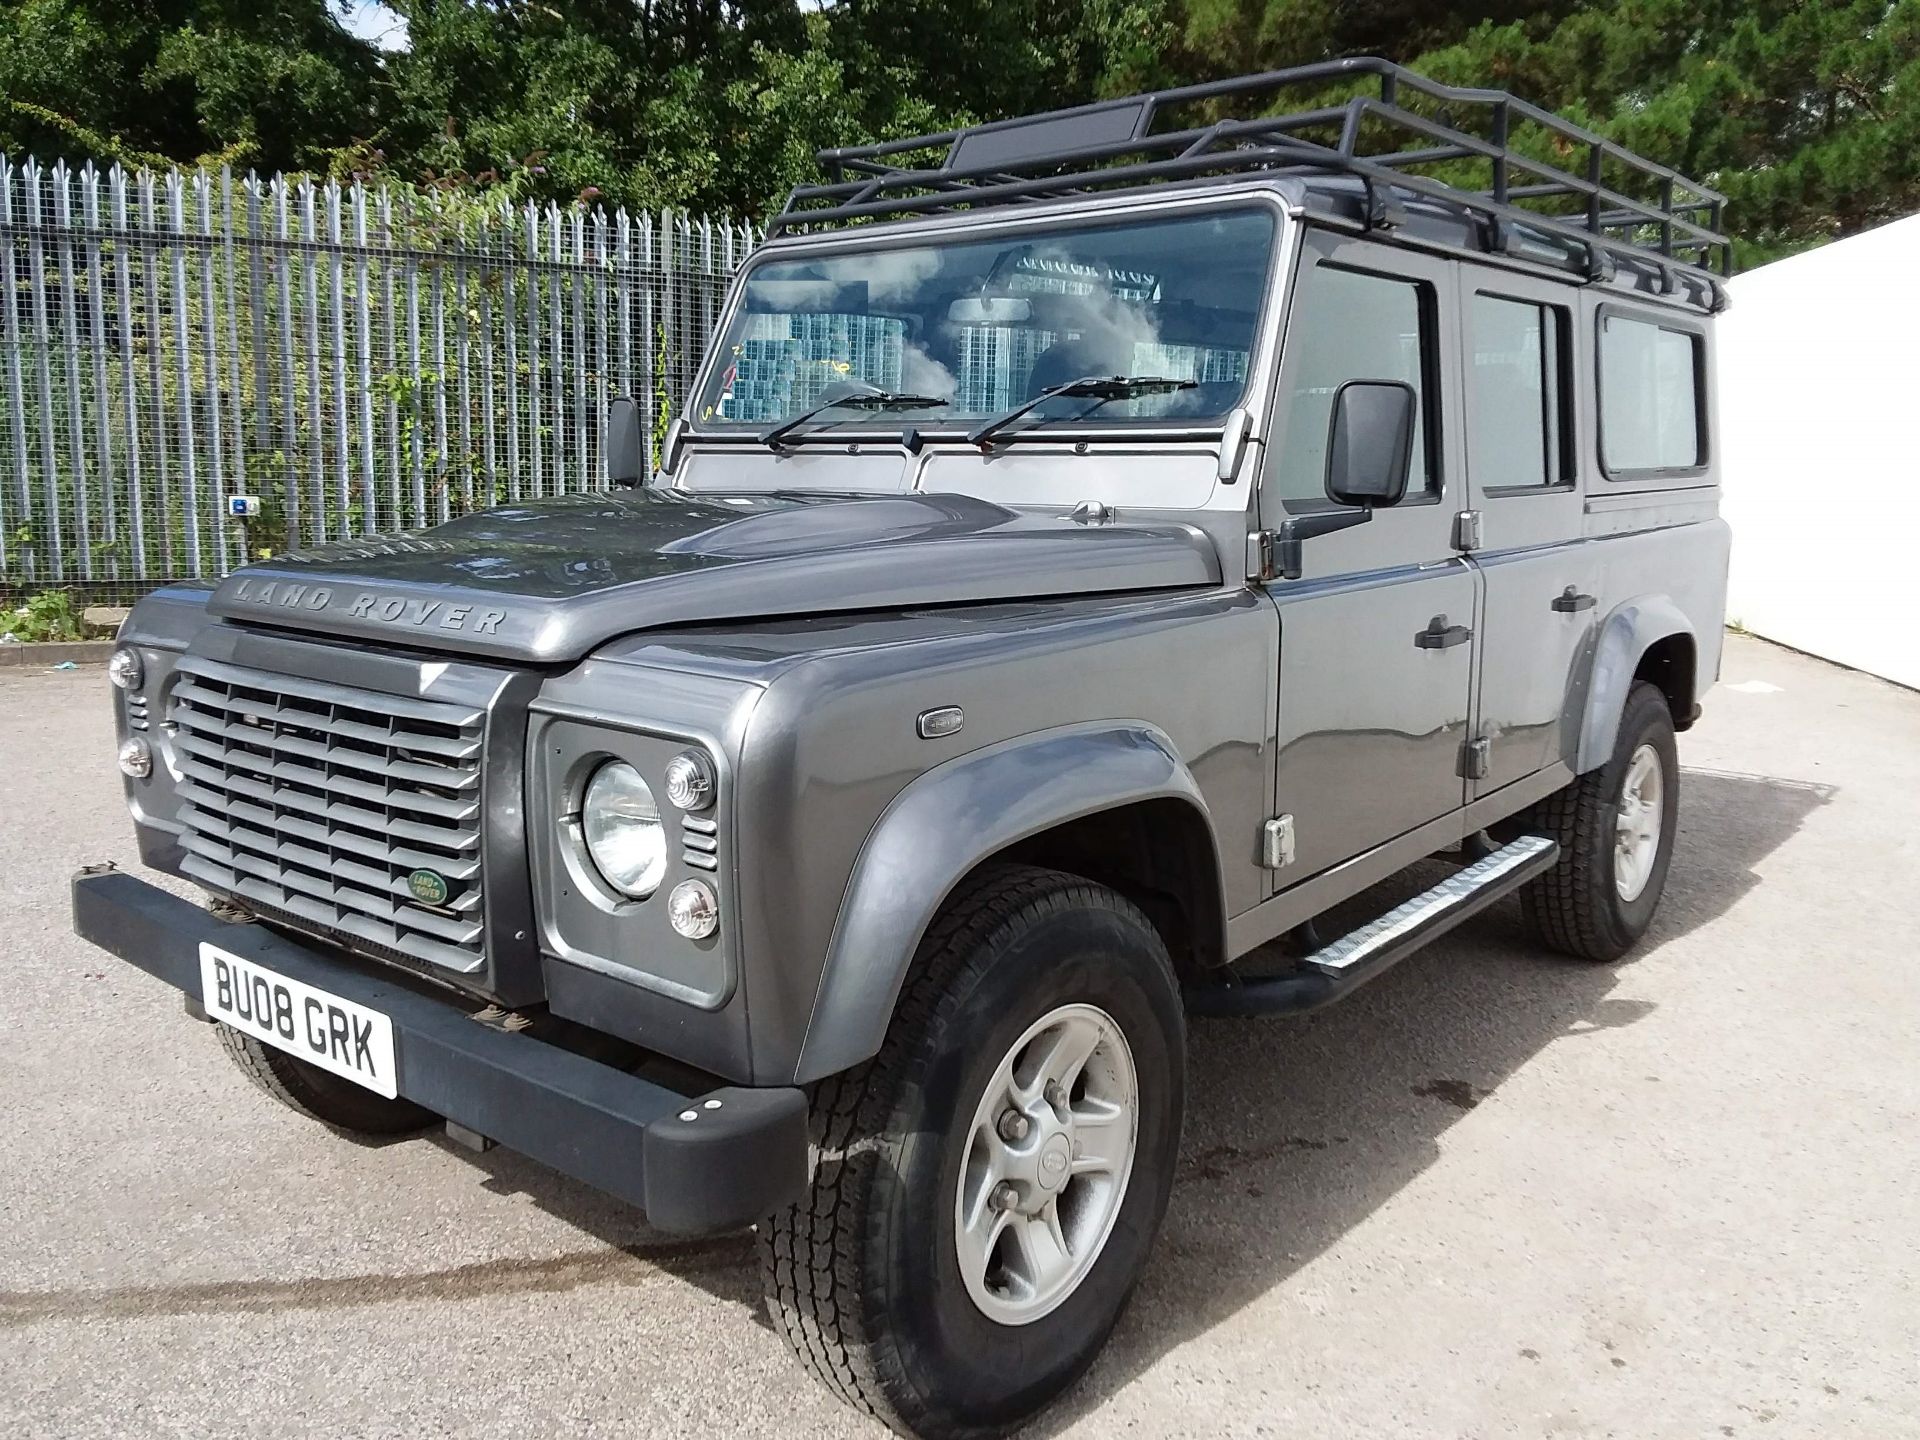 2008/08 REG LAND ROVER DEFENDER 110 XS LWB STATION WAGON 2.4 DIESEL, 7 SEATER, AIR CON *NO VAT* - Image 3 of 10